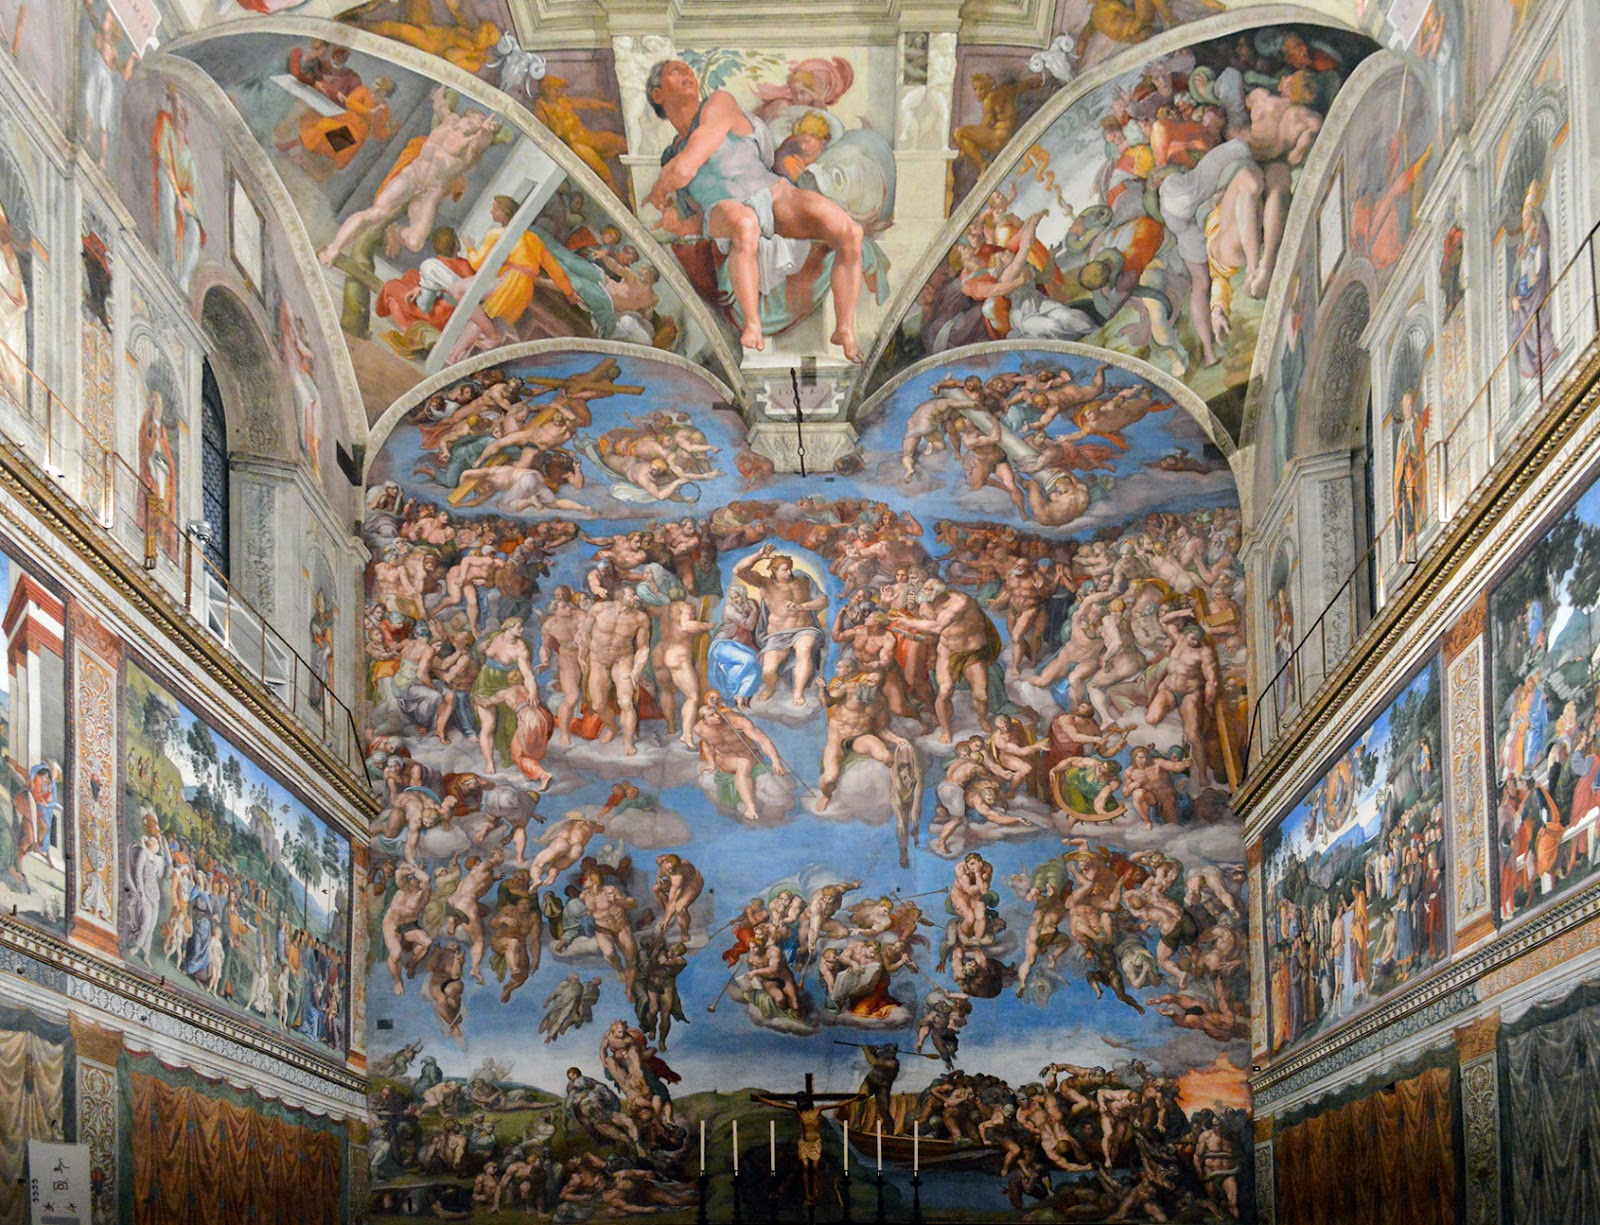 Last Judgment, Sistine Chapel 1534–41, Michelangelo. The ceiling and walls of the Sistine Chapel are covered with figures in heaven and on earth. 